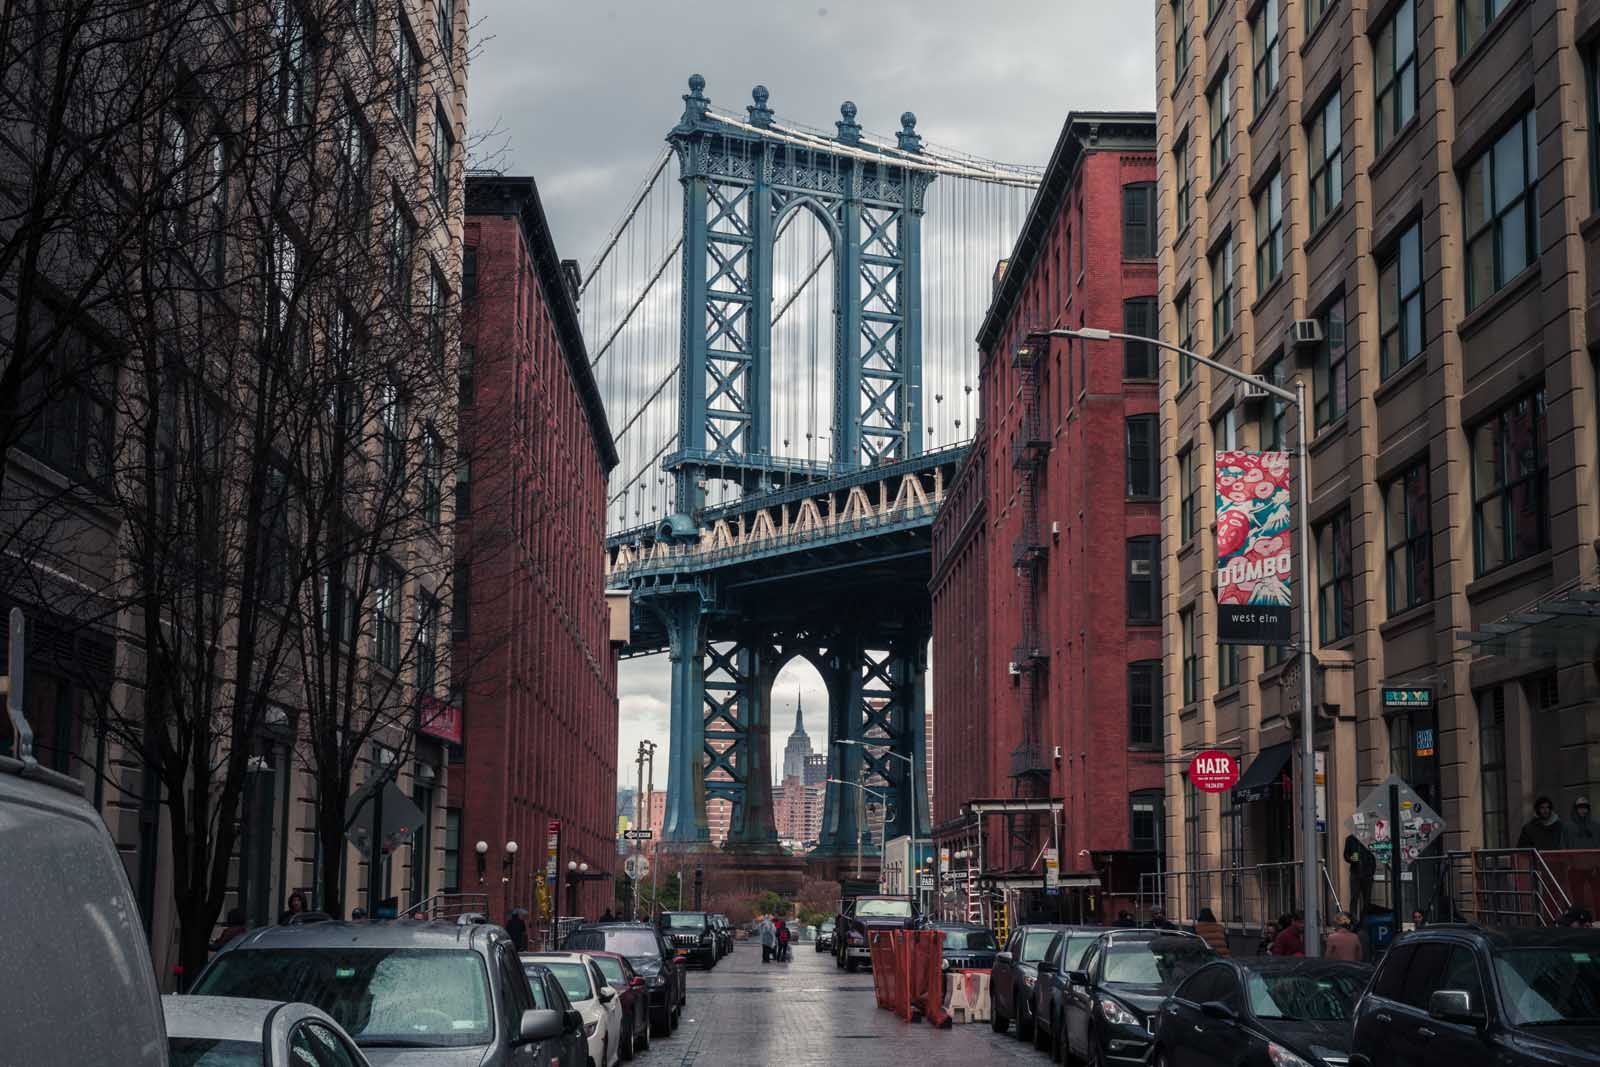 View of Manhatten Bridge with Empire State Building in DUMBO Brooklyn